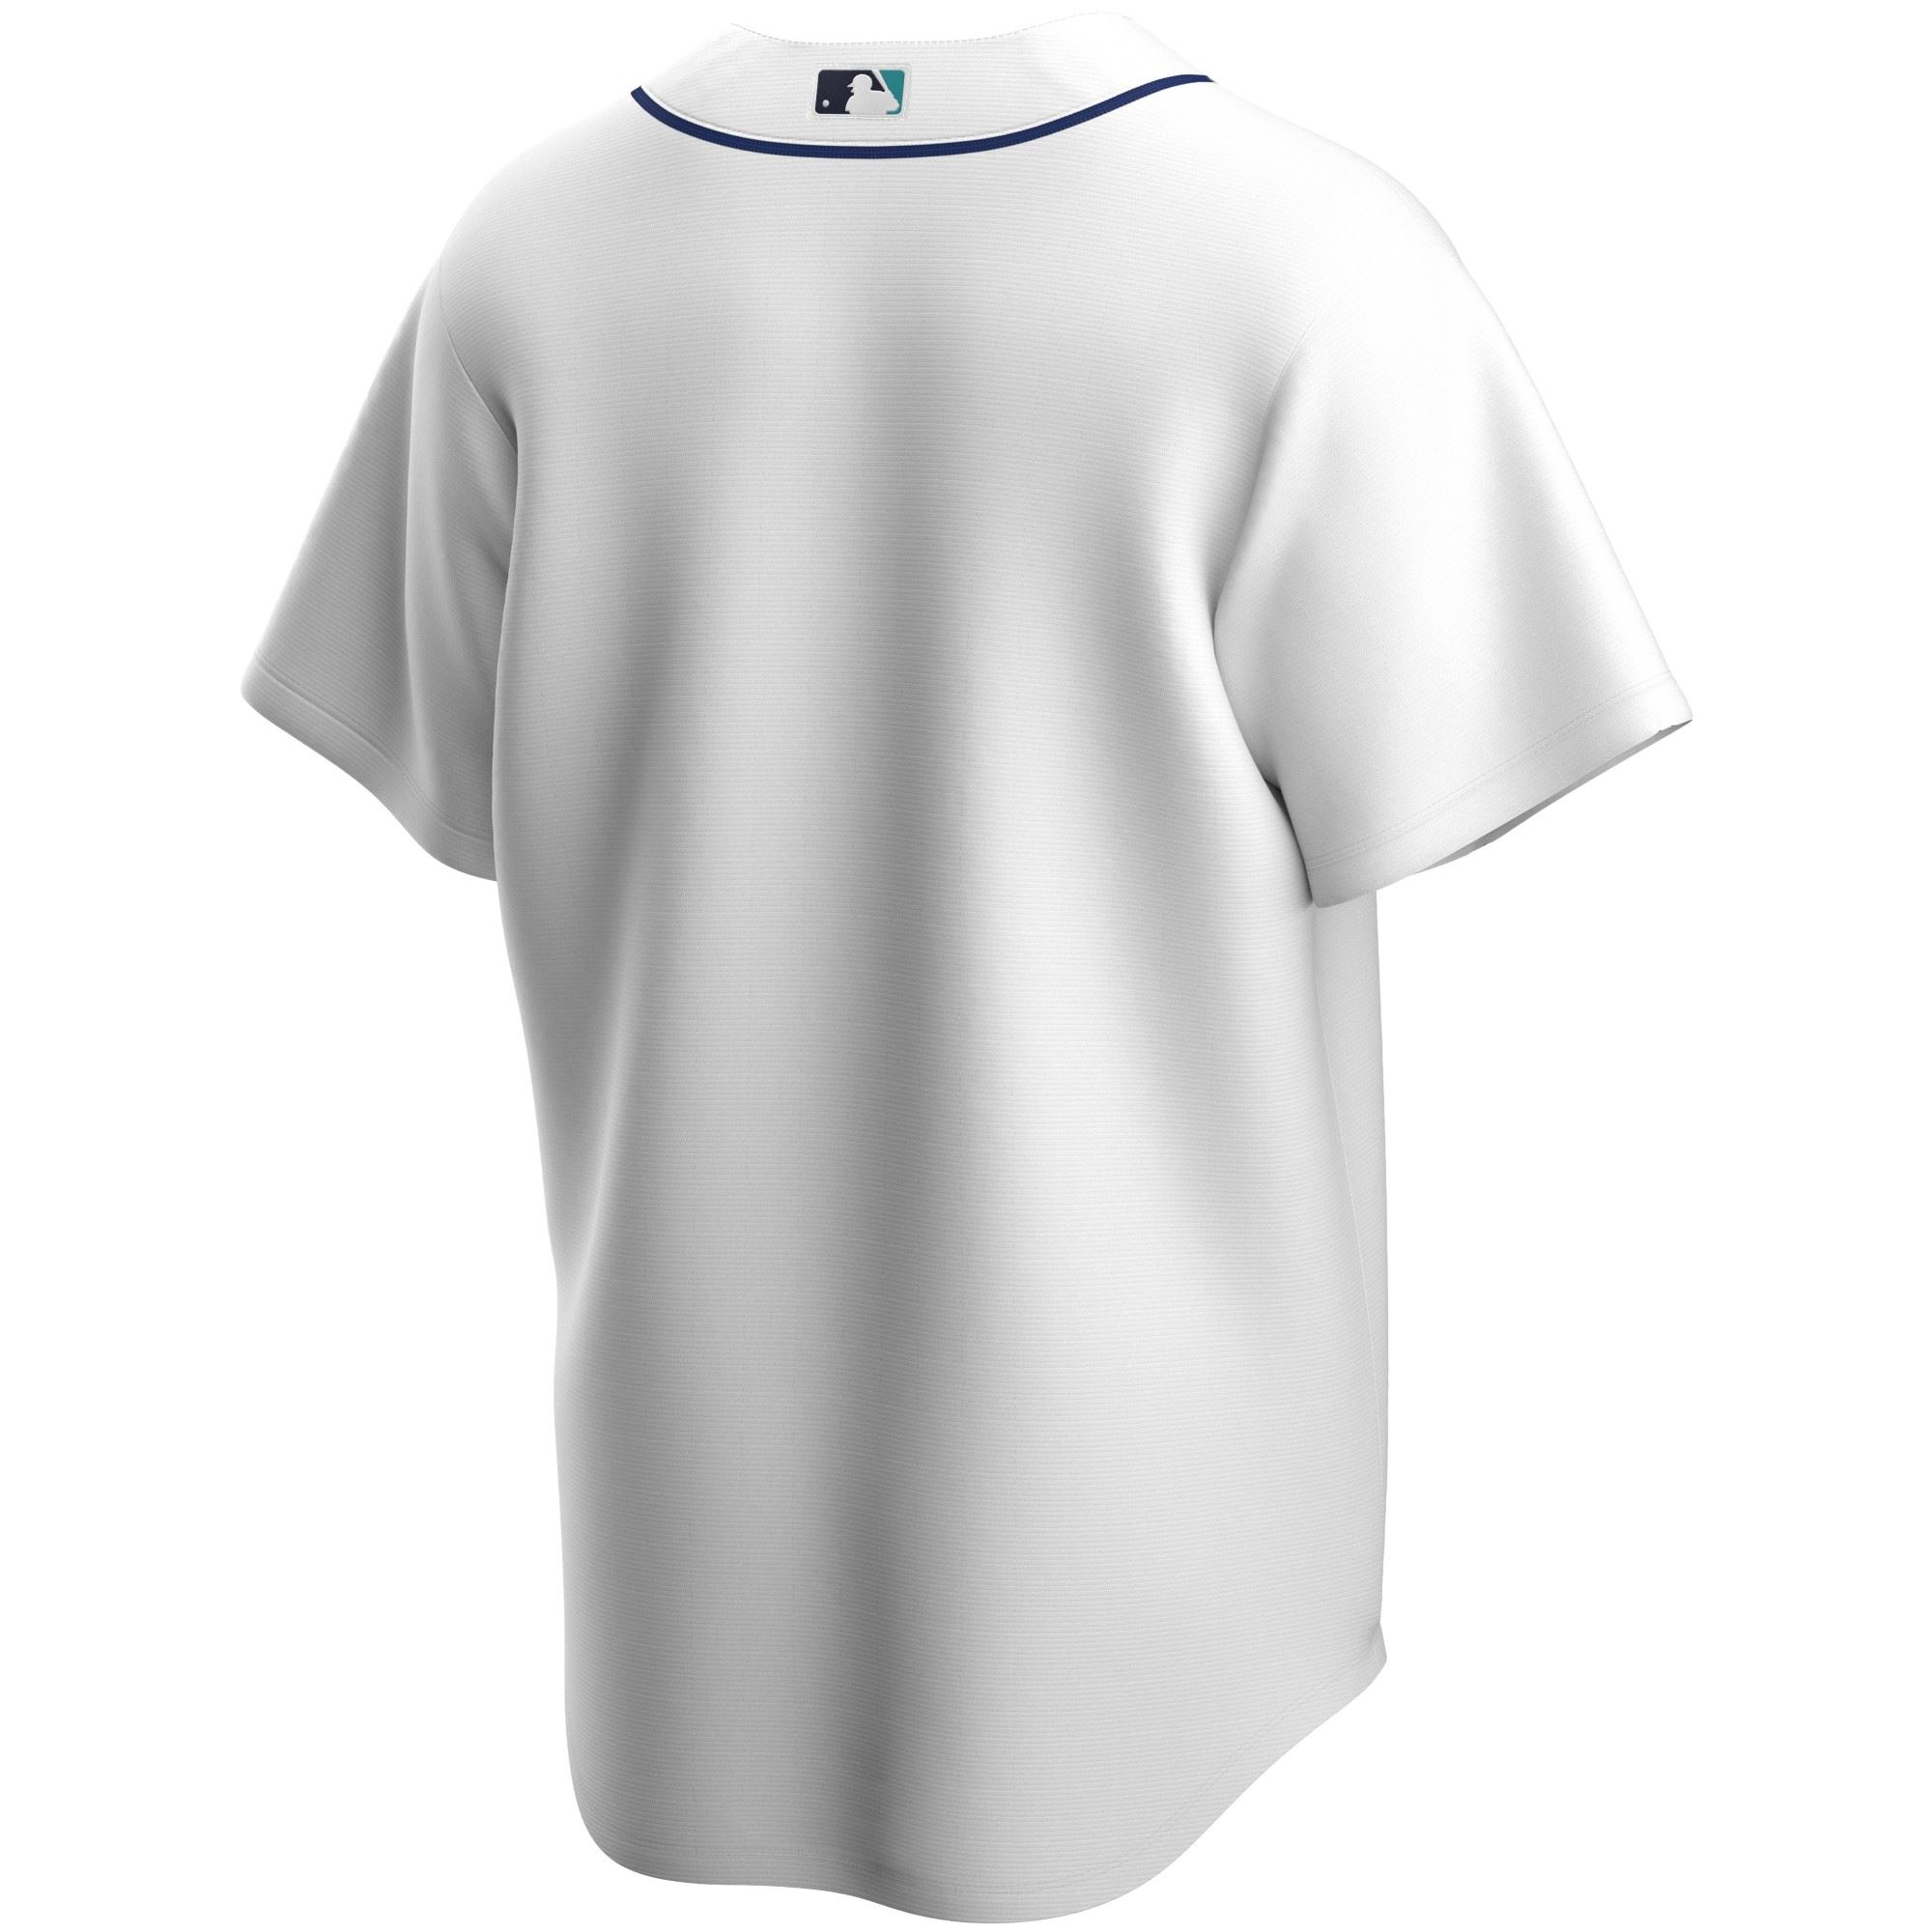 Seattle Mariners Official MLB Replica Home Jersey White Nike